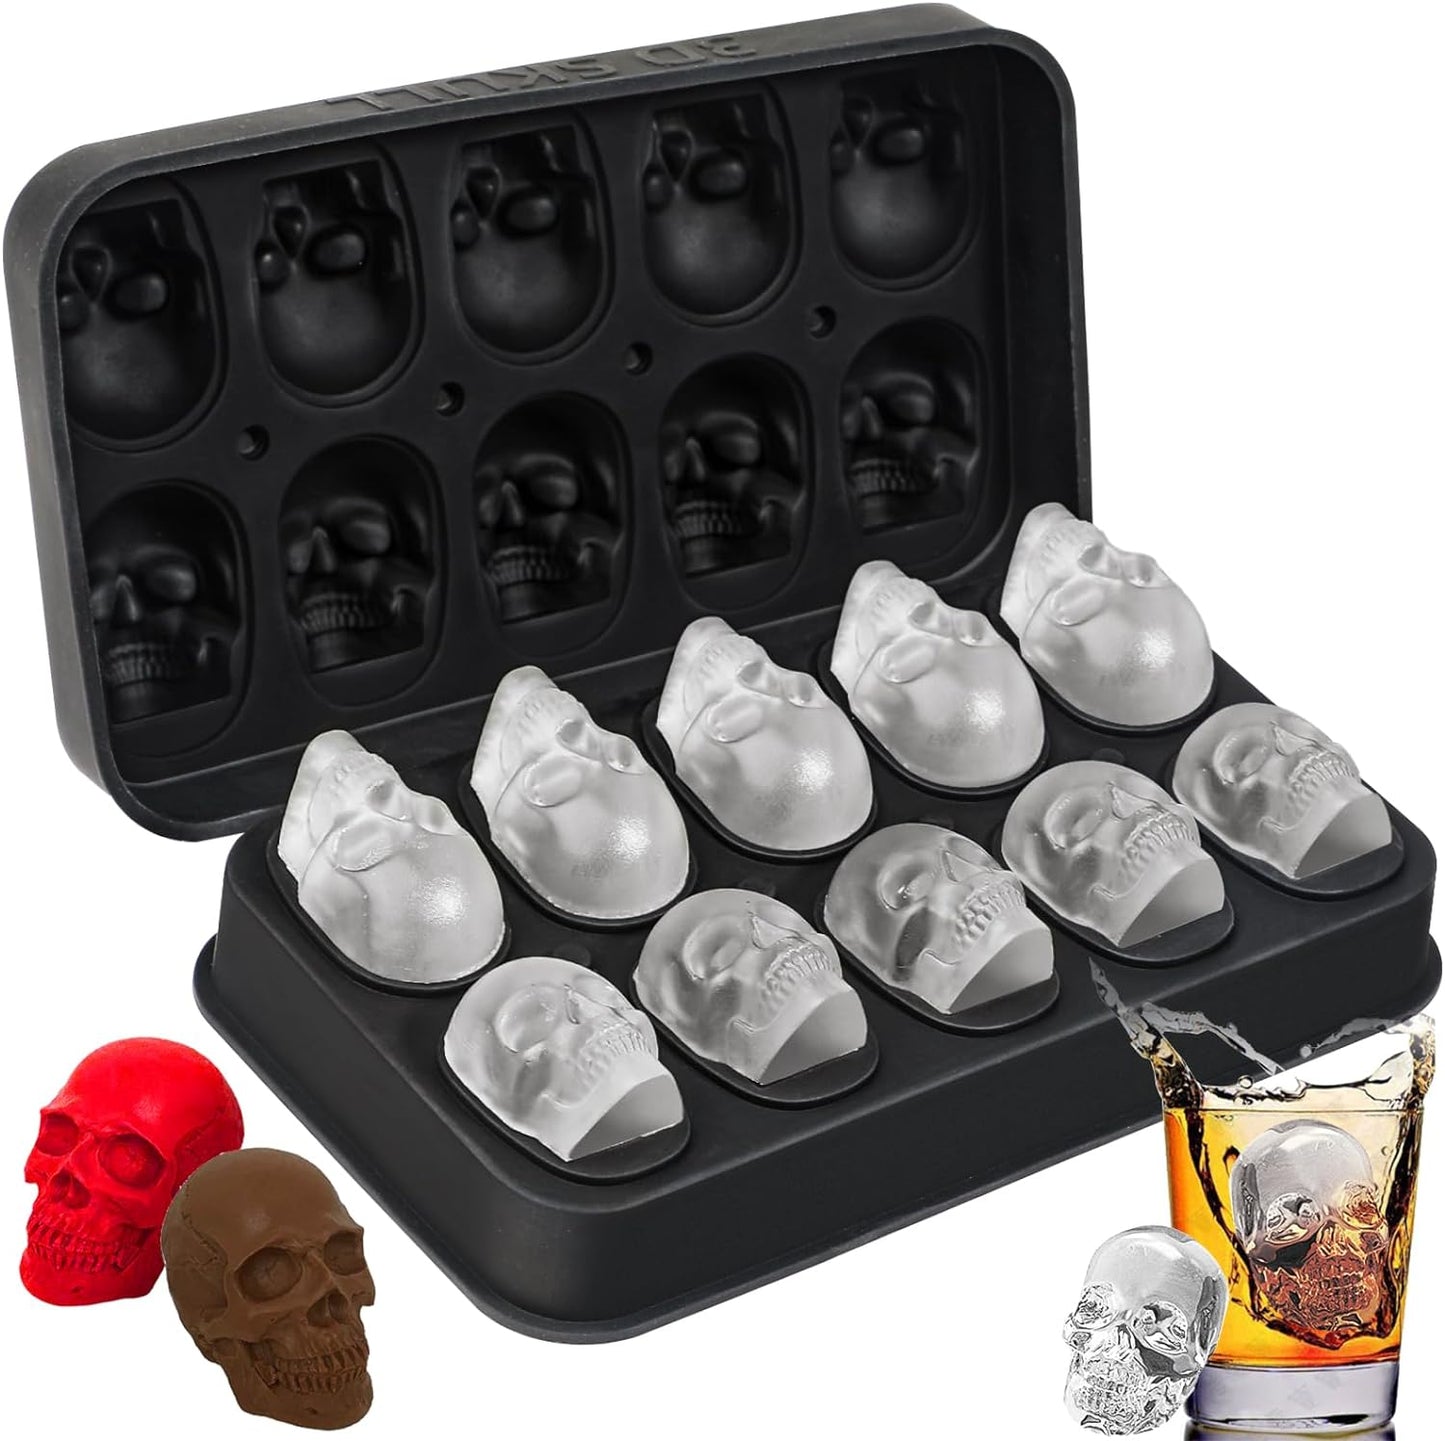  Webake Silicone Chocolate Molds Skull Candy Mold for